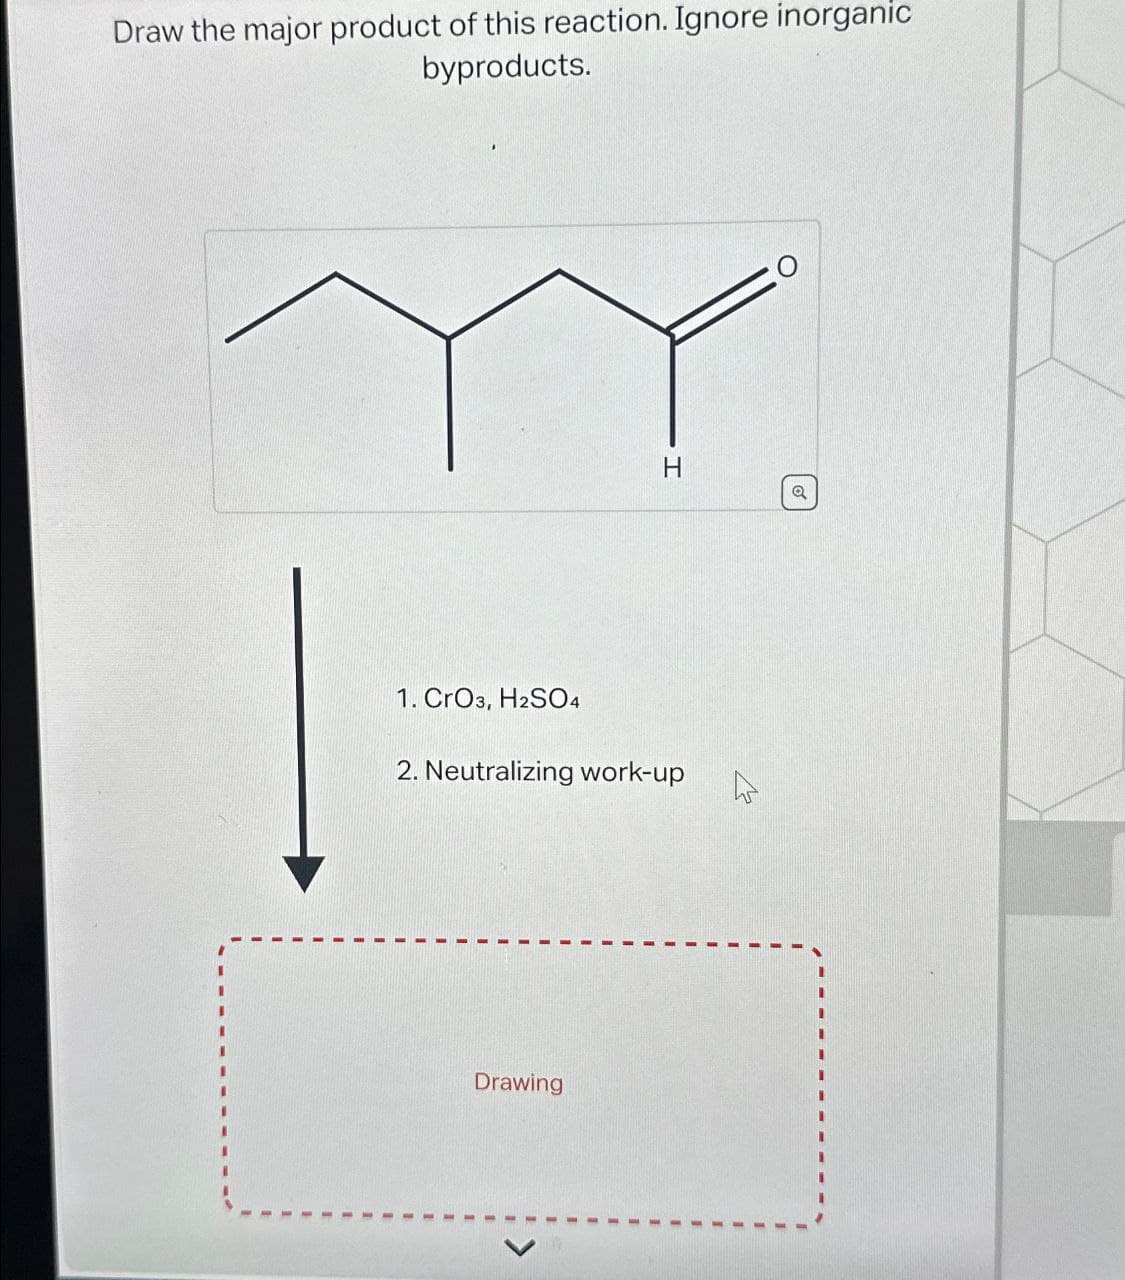 Draw the major product of this reaction. Ignore inorganic
byproducts.
1. CrO3, H2SO4
H
2. Neutralizing work-up
Drawing